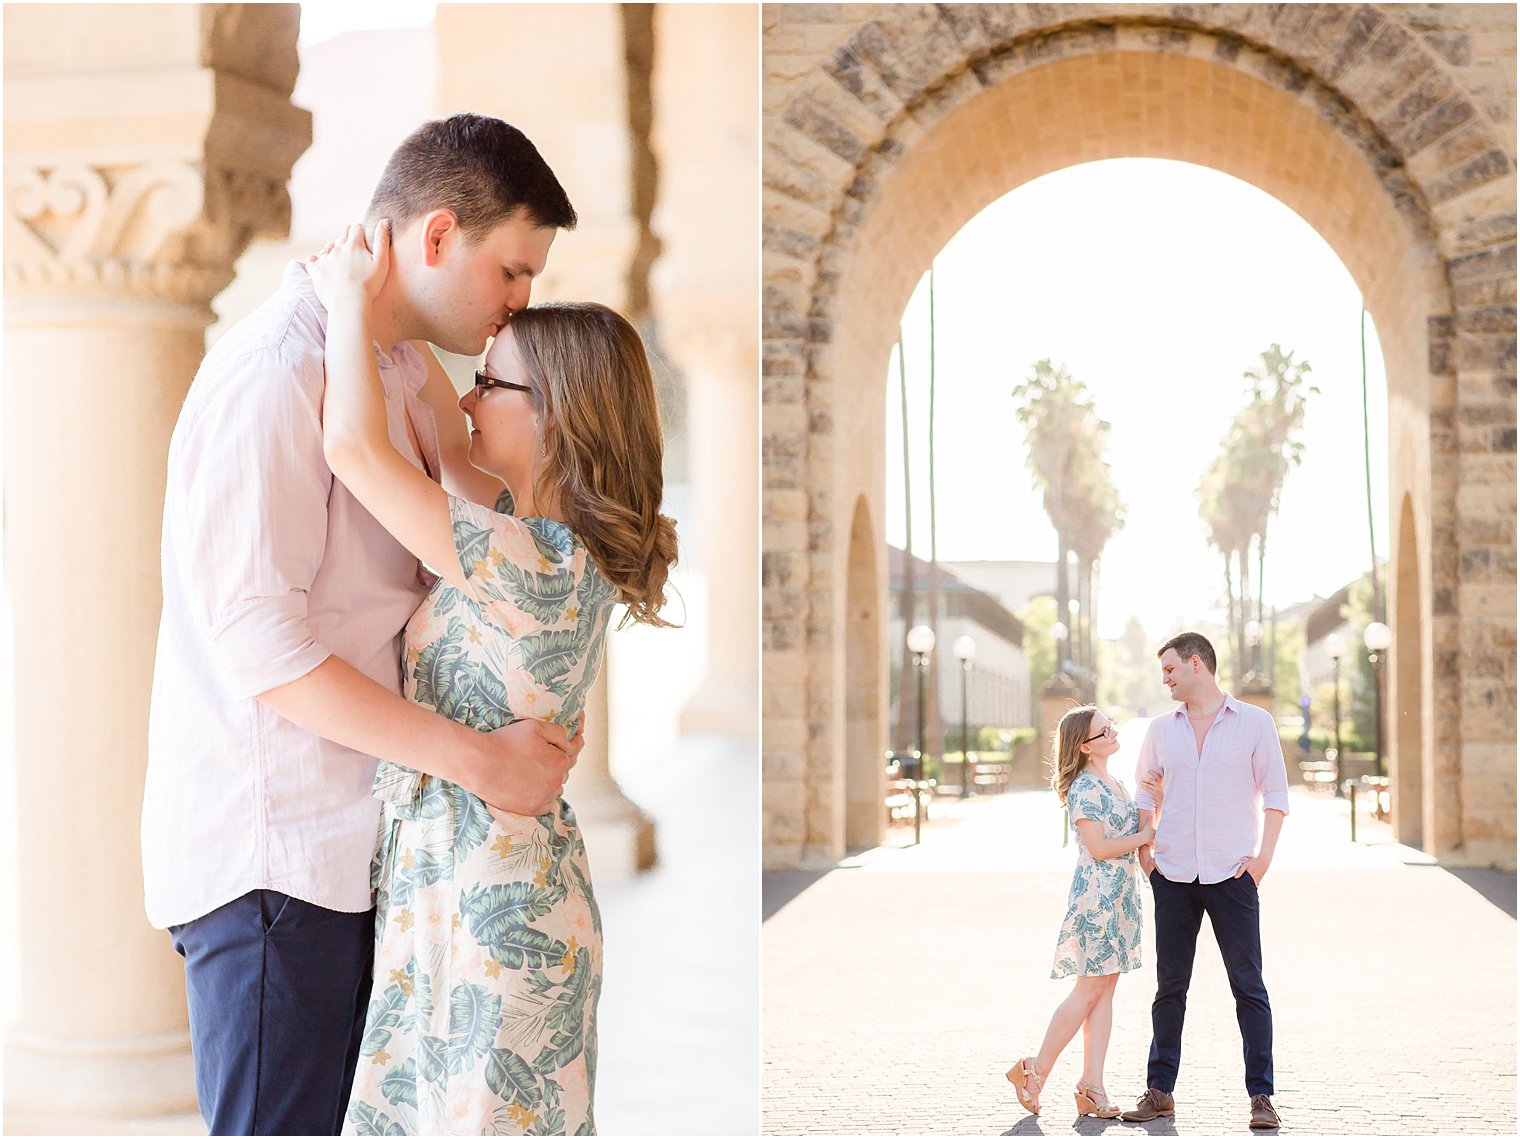 Young couple in Stanford University Engagement Photos by Idalia Photography